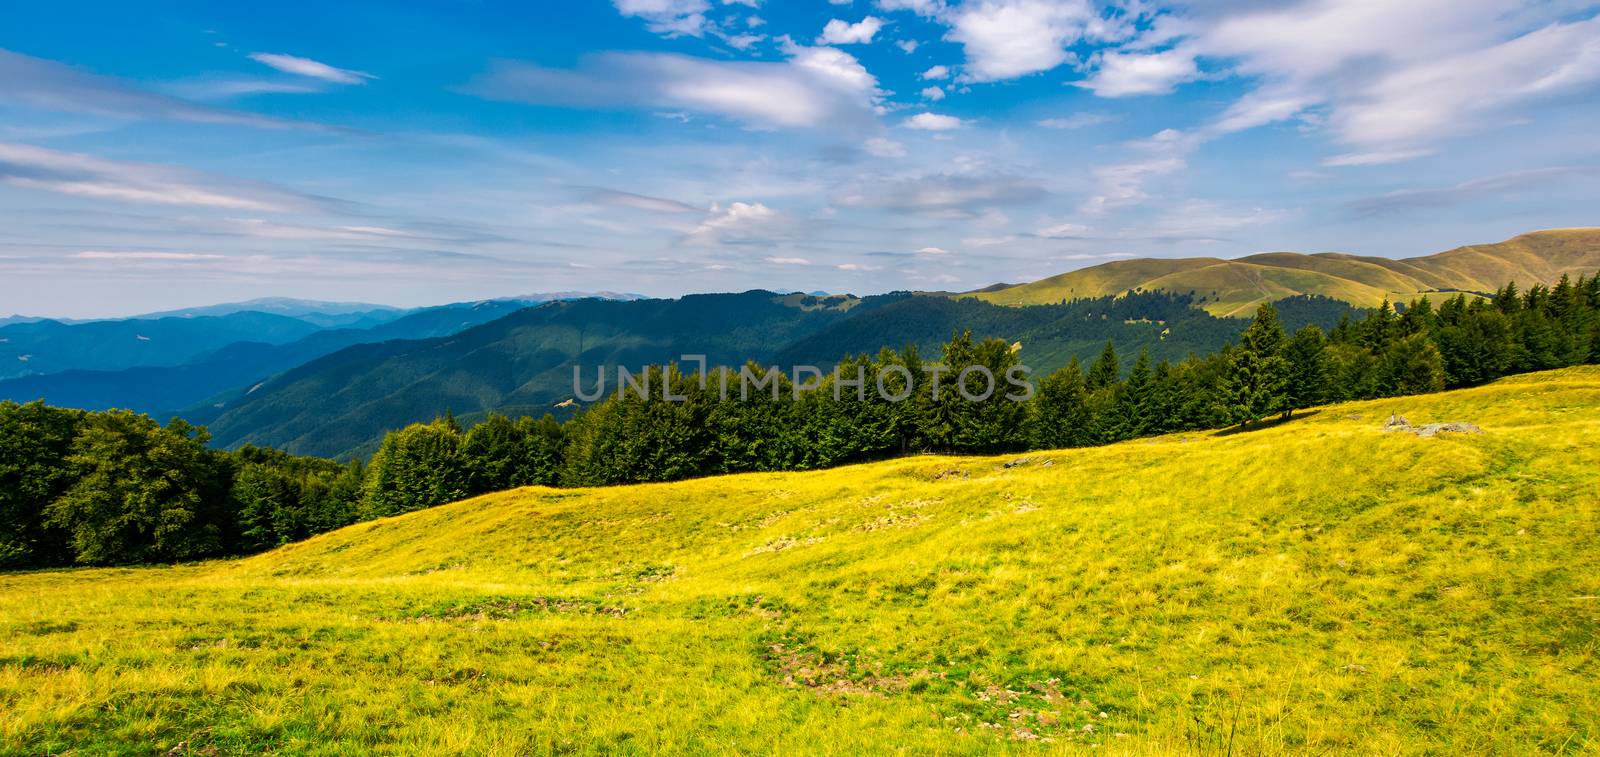 gorgeous weather over grassy slopes of Carpathians by Pellinni